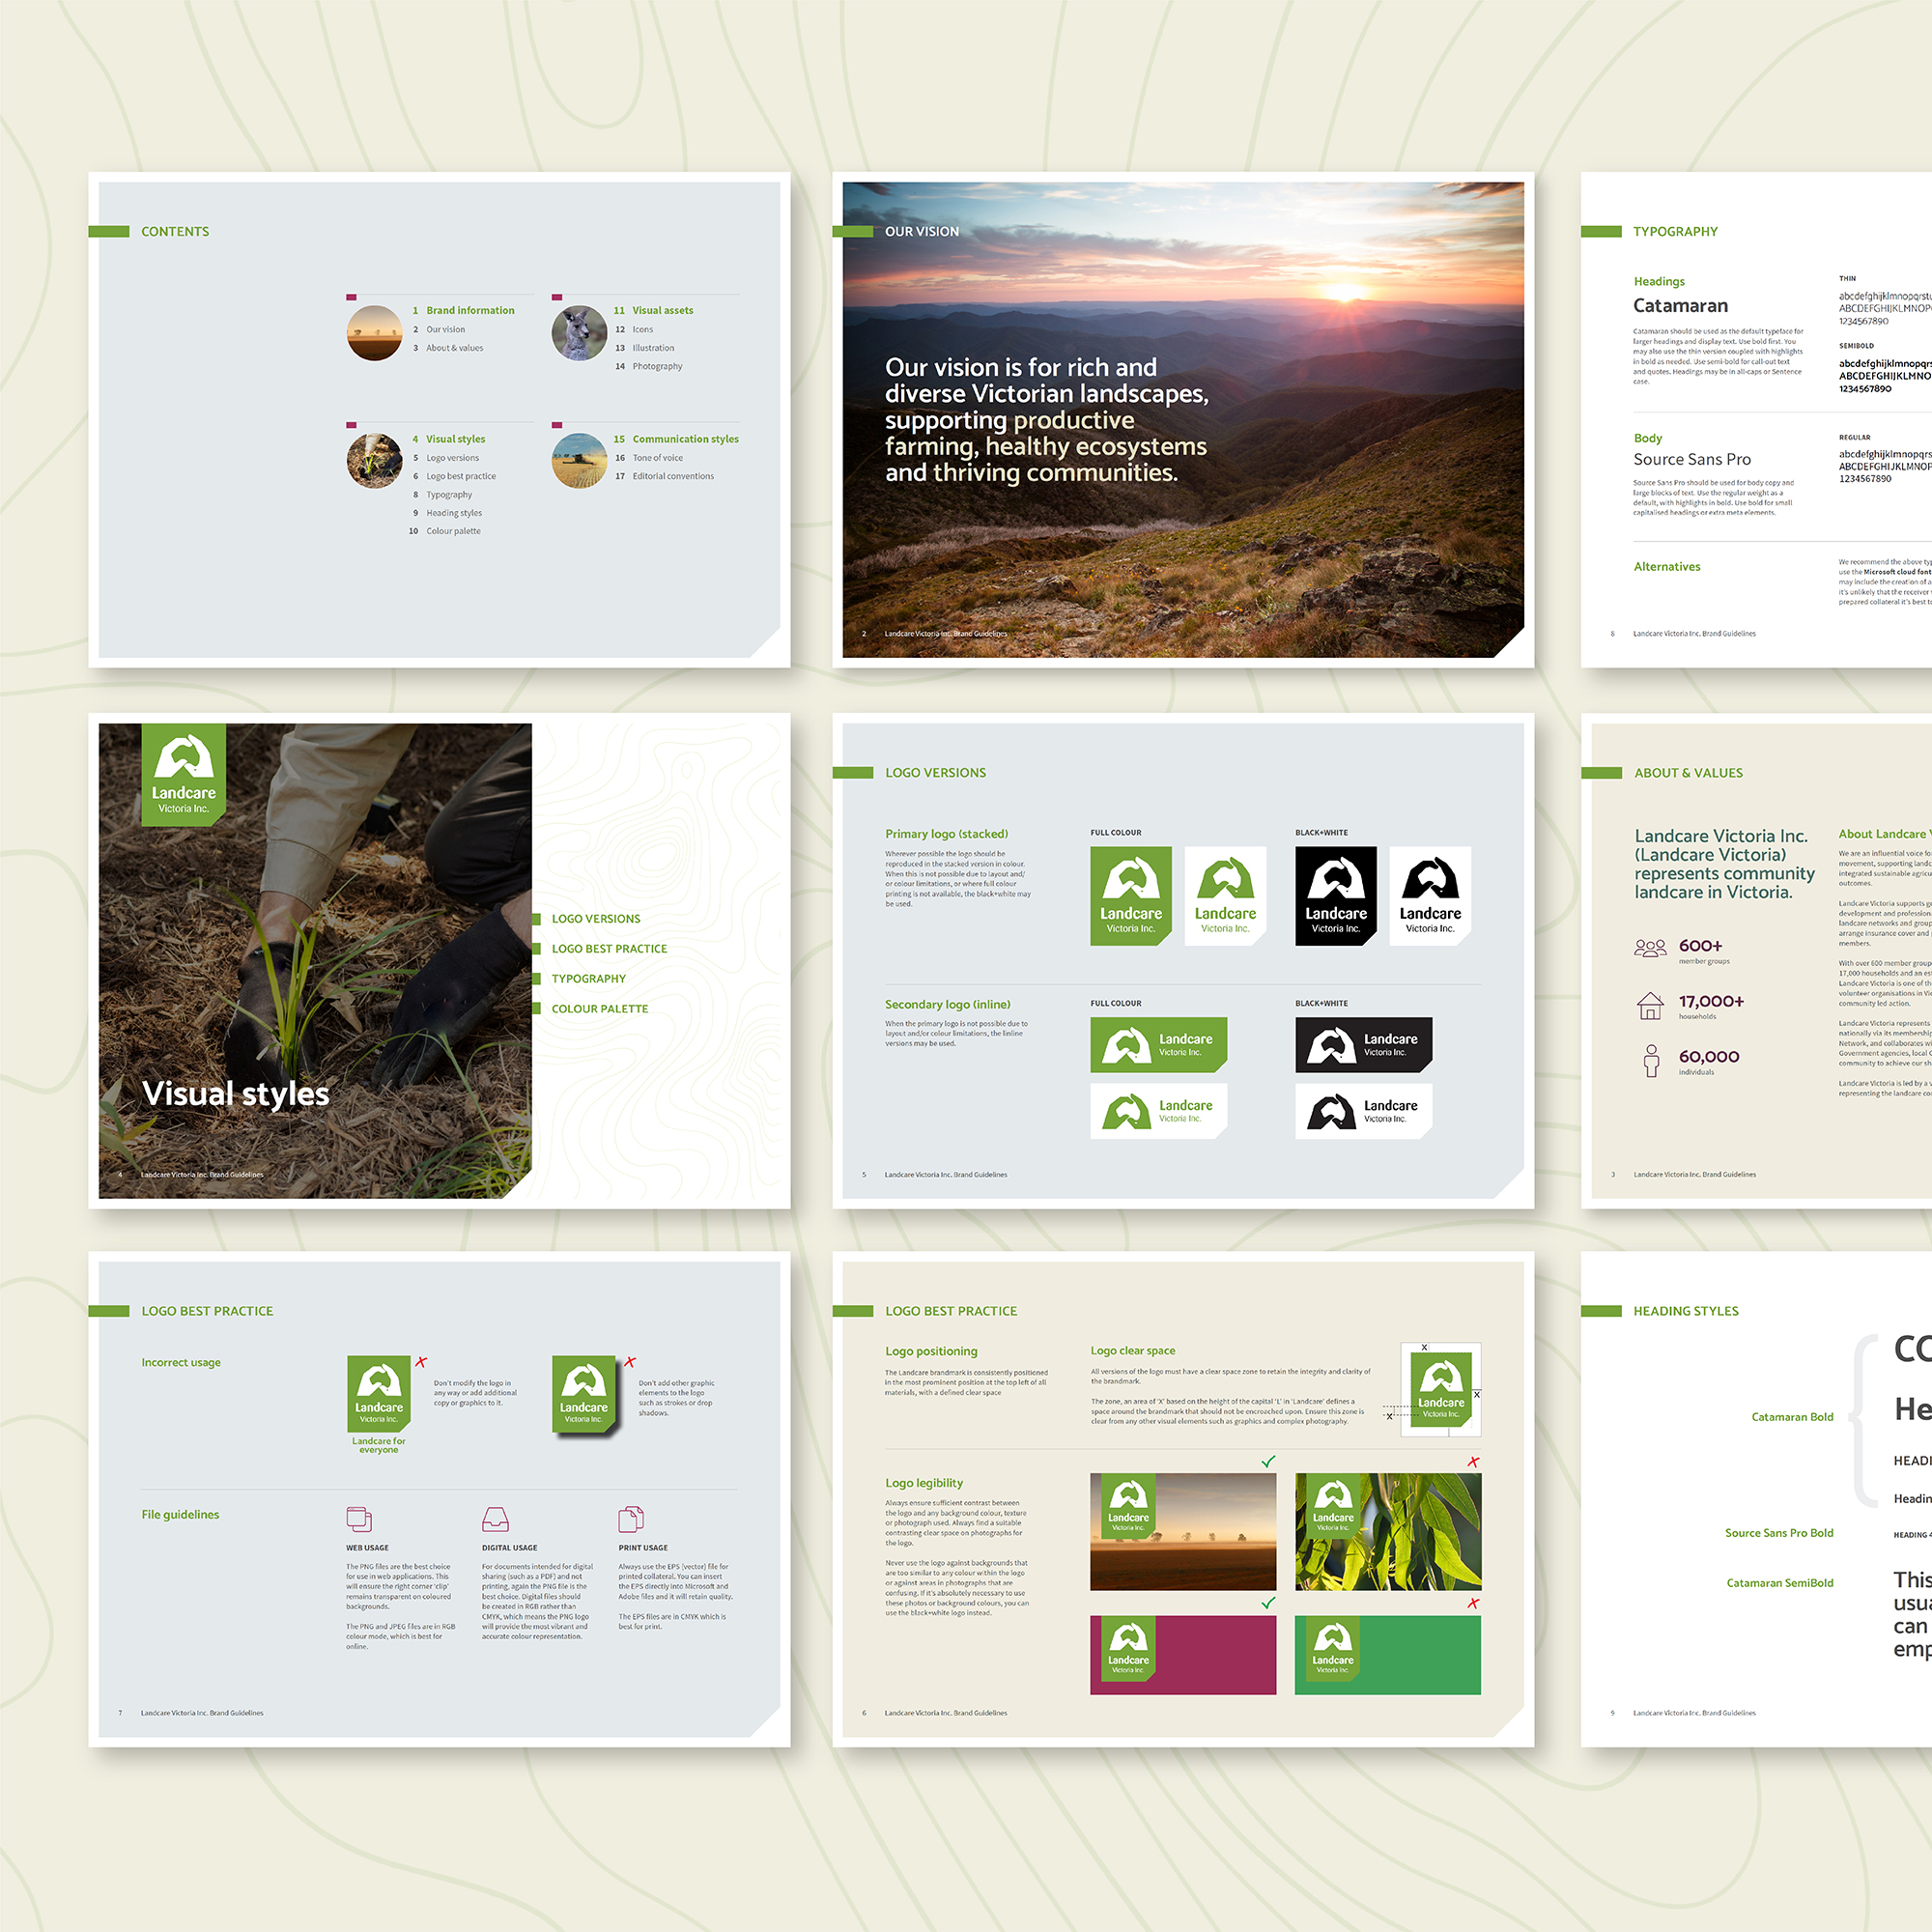 Mockup of various pages from Landcare Victoria's brand guidelines document in full colour (tile 1)